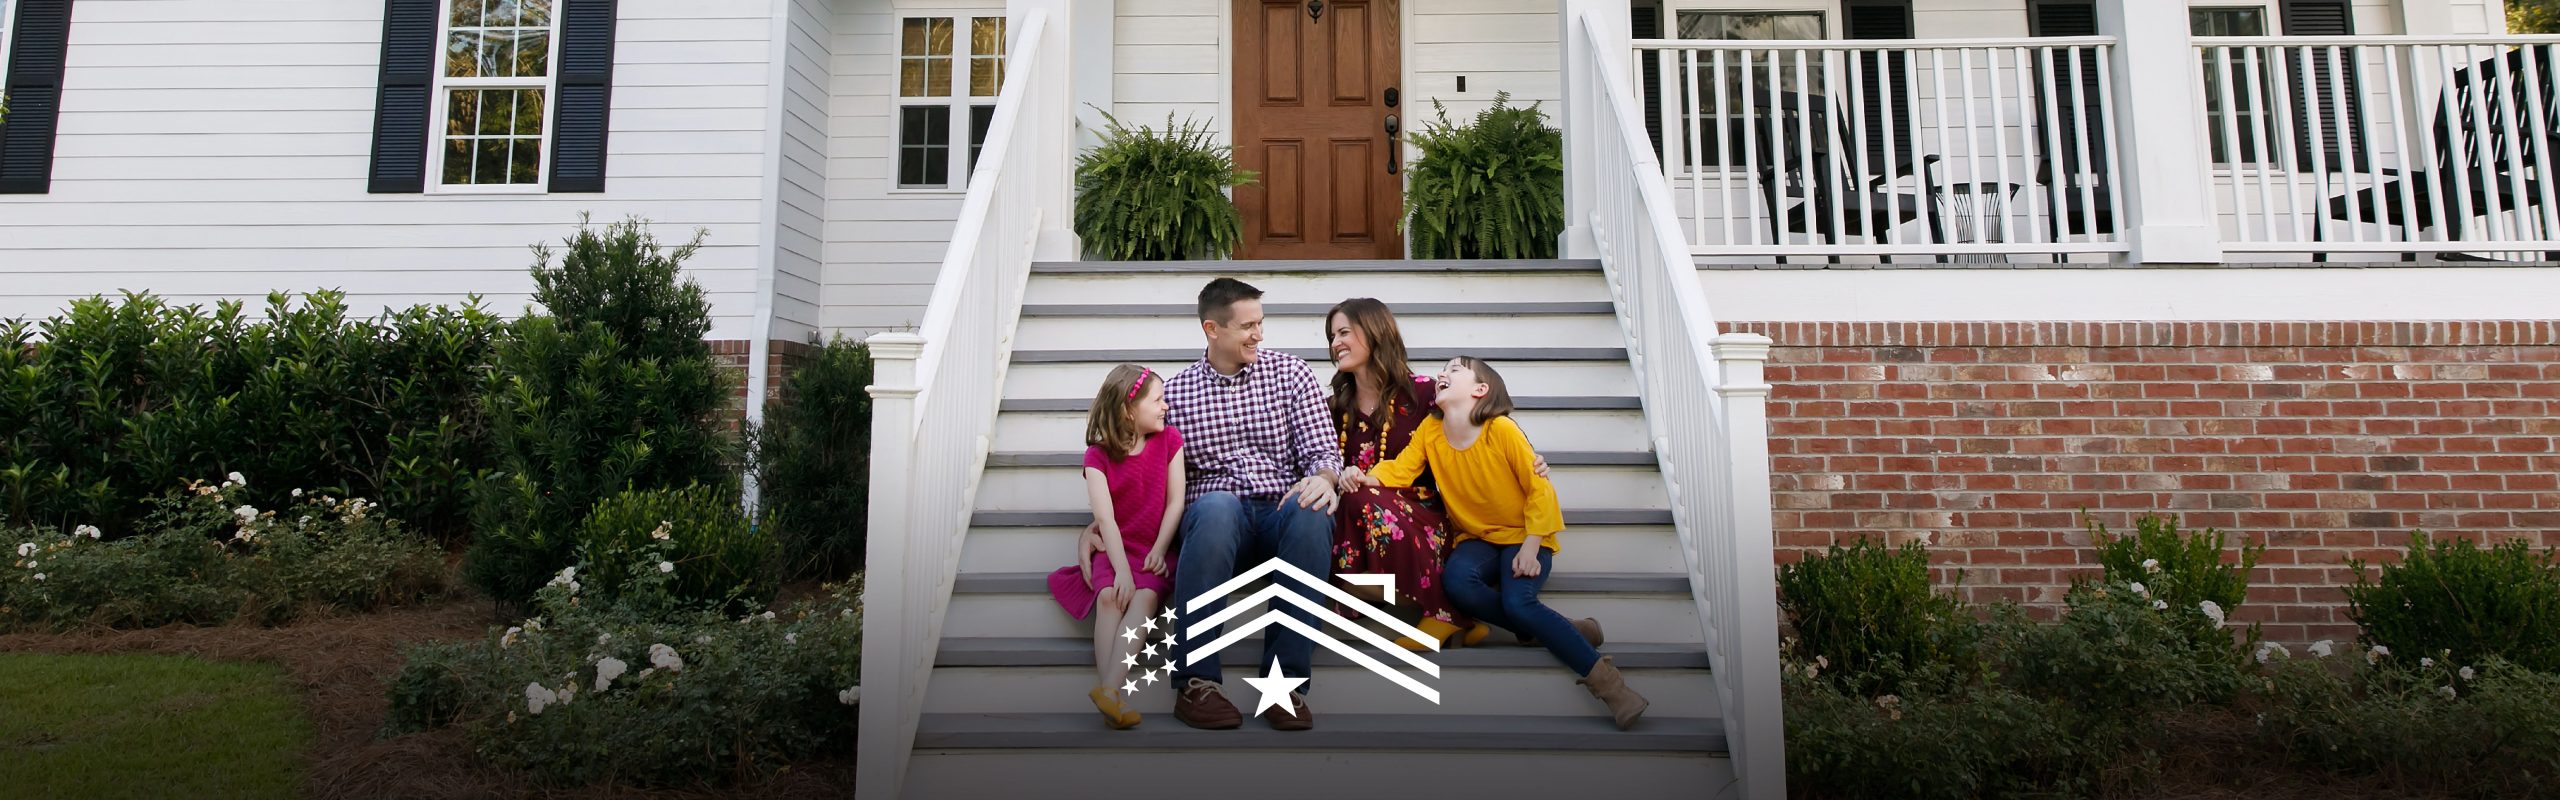 A family consisting of two adults and two children is sitting on the steps of a white house with a brown door, engaging in what appears to be a light-hearted conversation on the homefront.